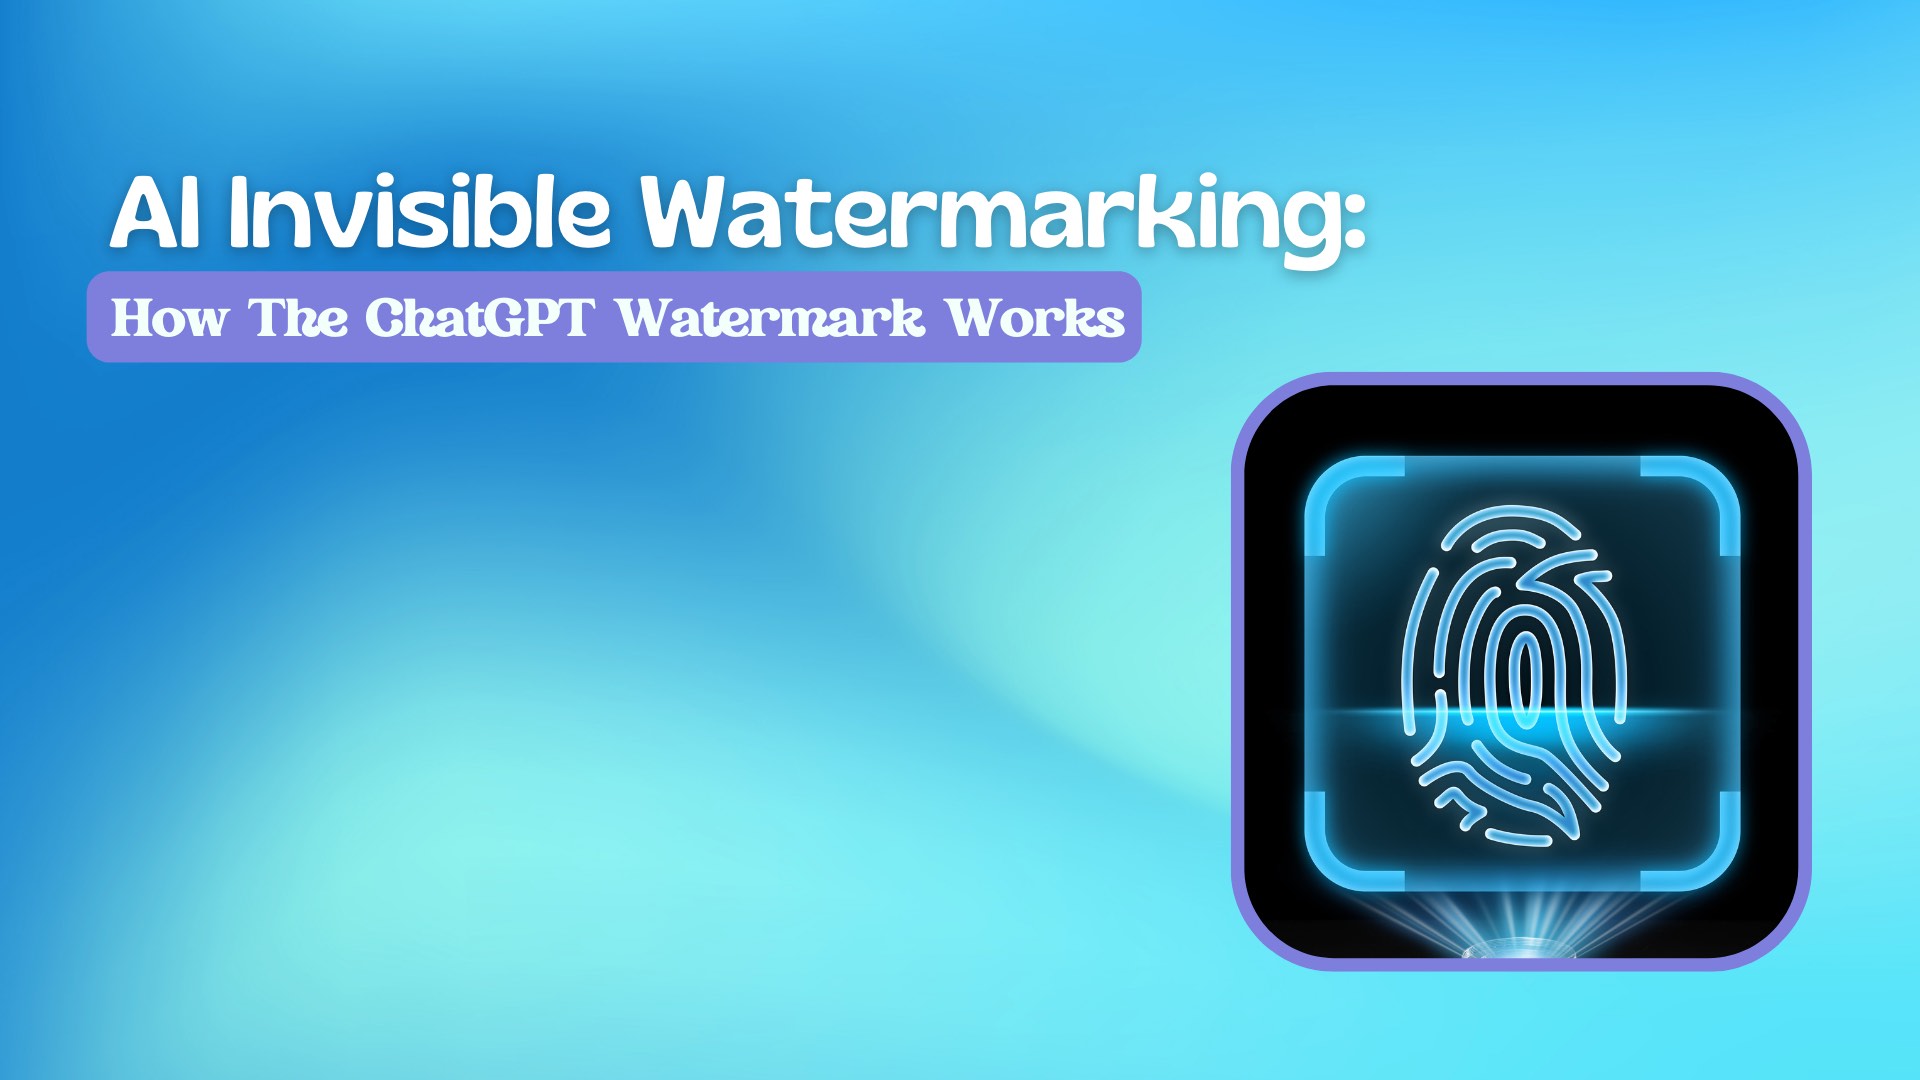 AI Invisible Watermarking: How The ChatGPT Watermark Works